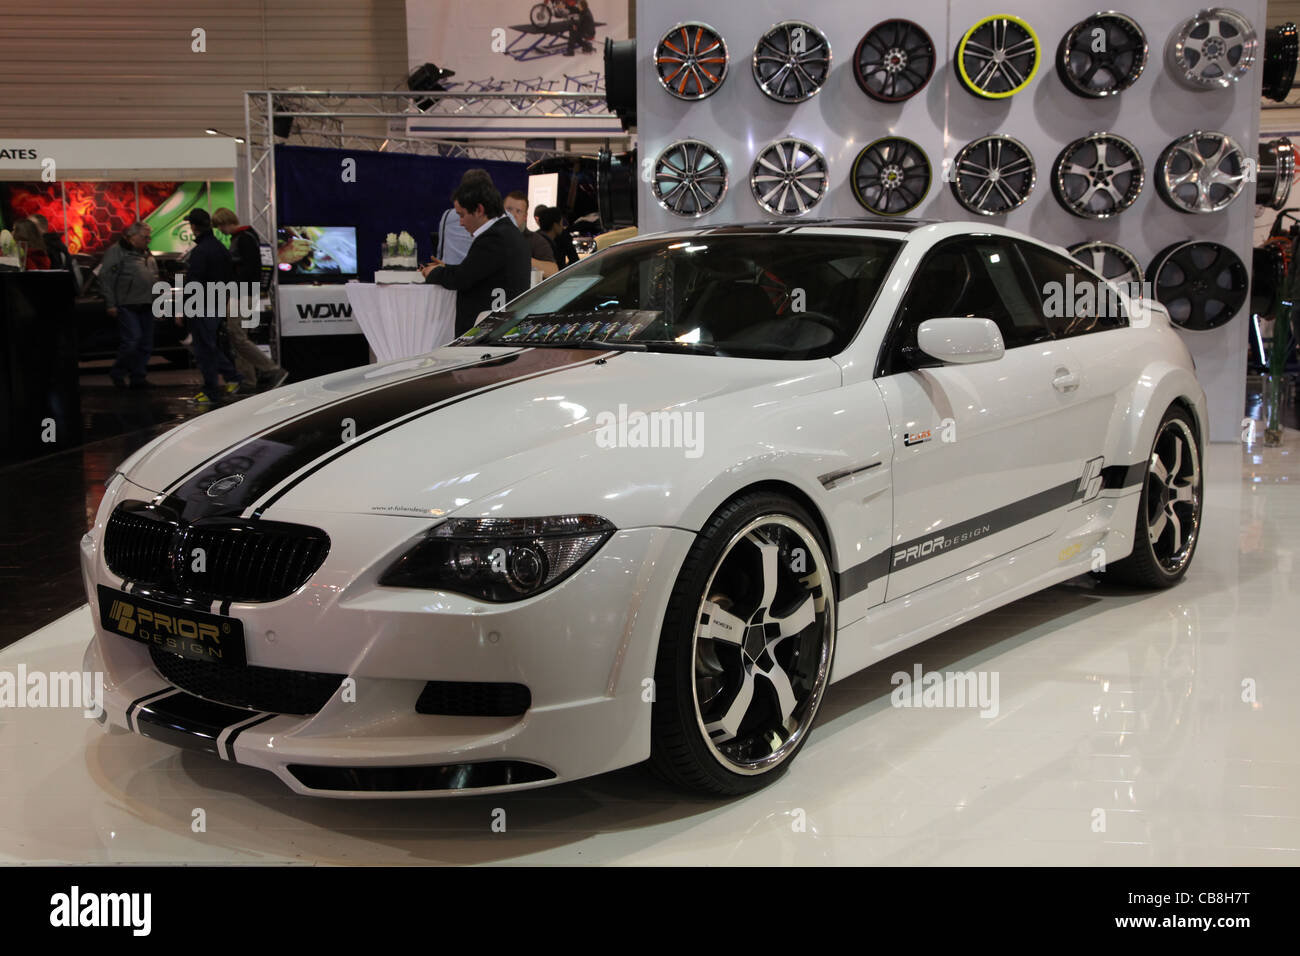 BMW M6 from the tuning company Prior Design shown at the Essen Motor Show in Essen, Germany, on November 29, 201 Stock Photo